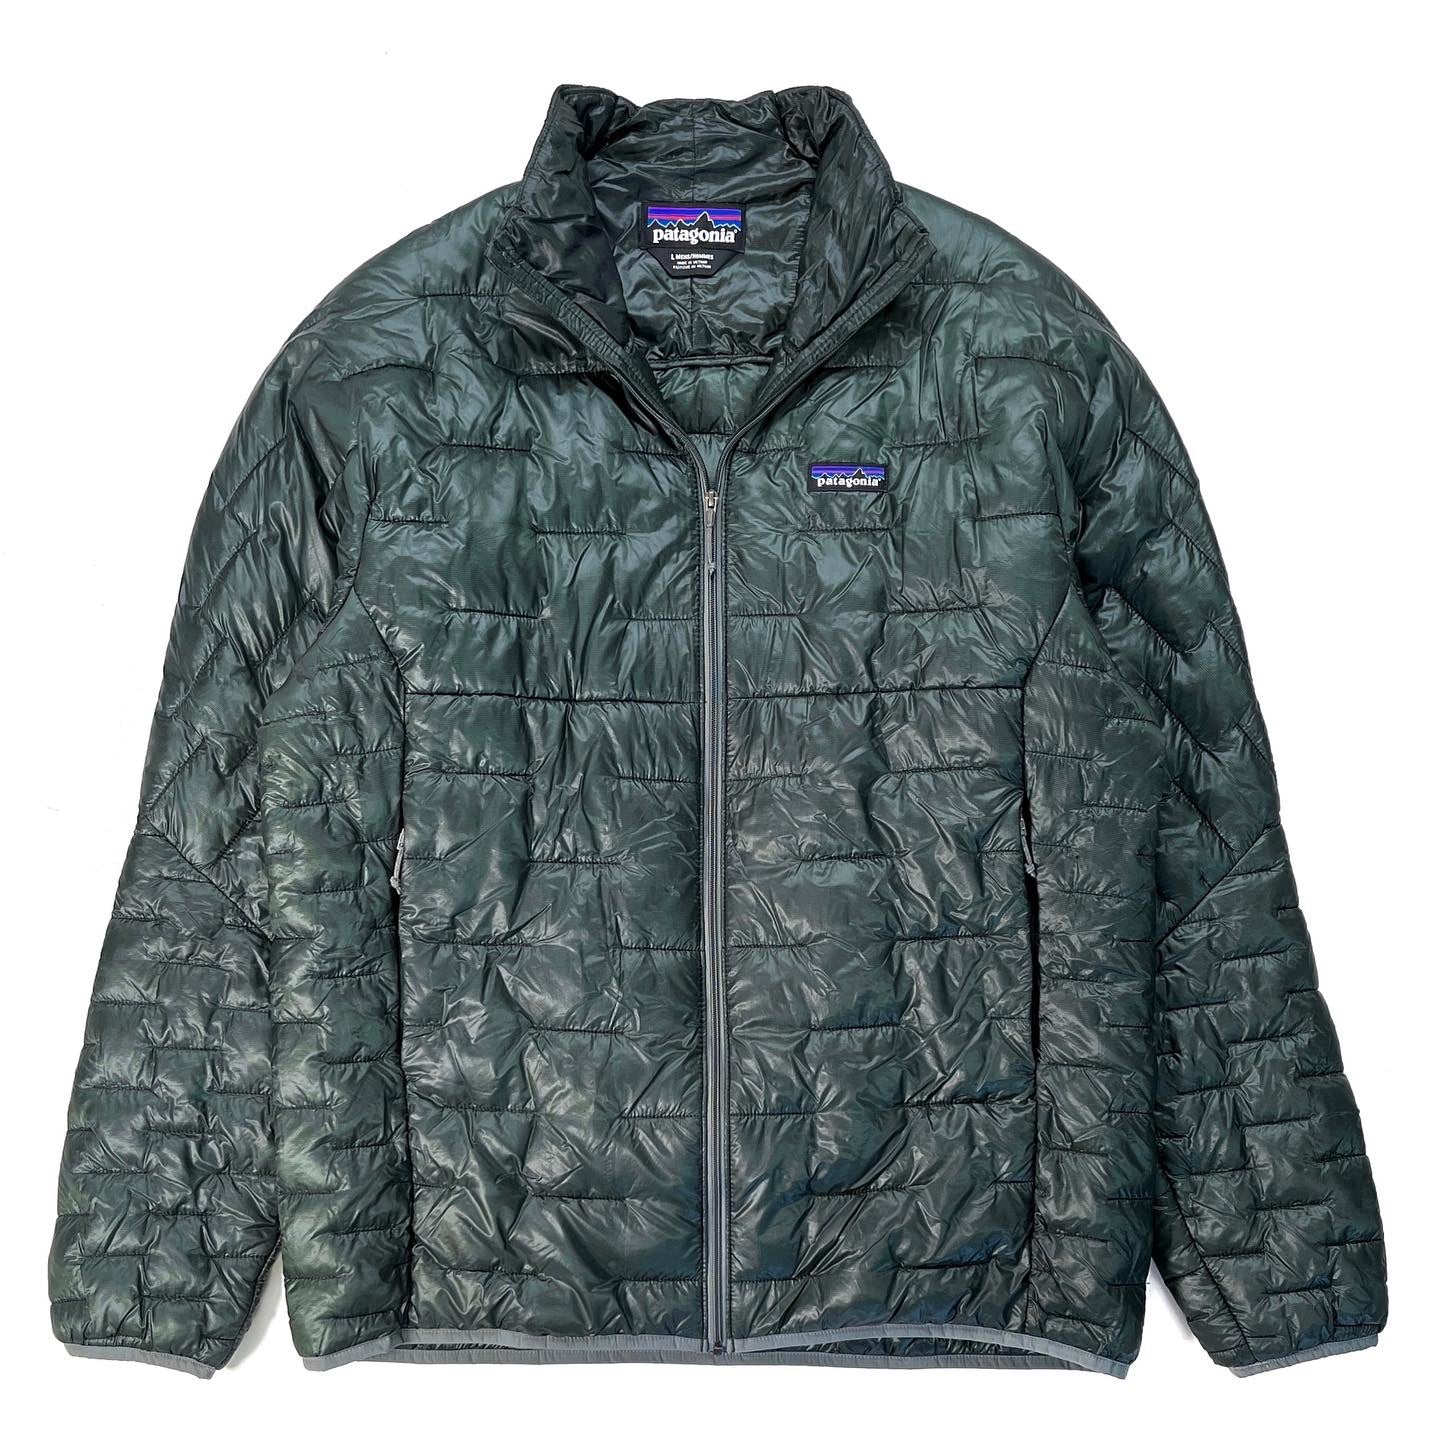 2019 Patagonia Mens Micro Puff Insulated Jacket, Carbon (L)